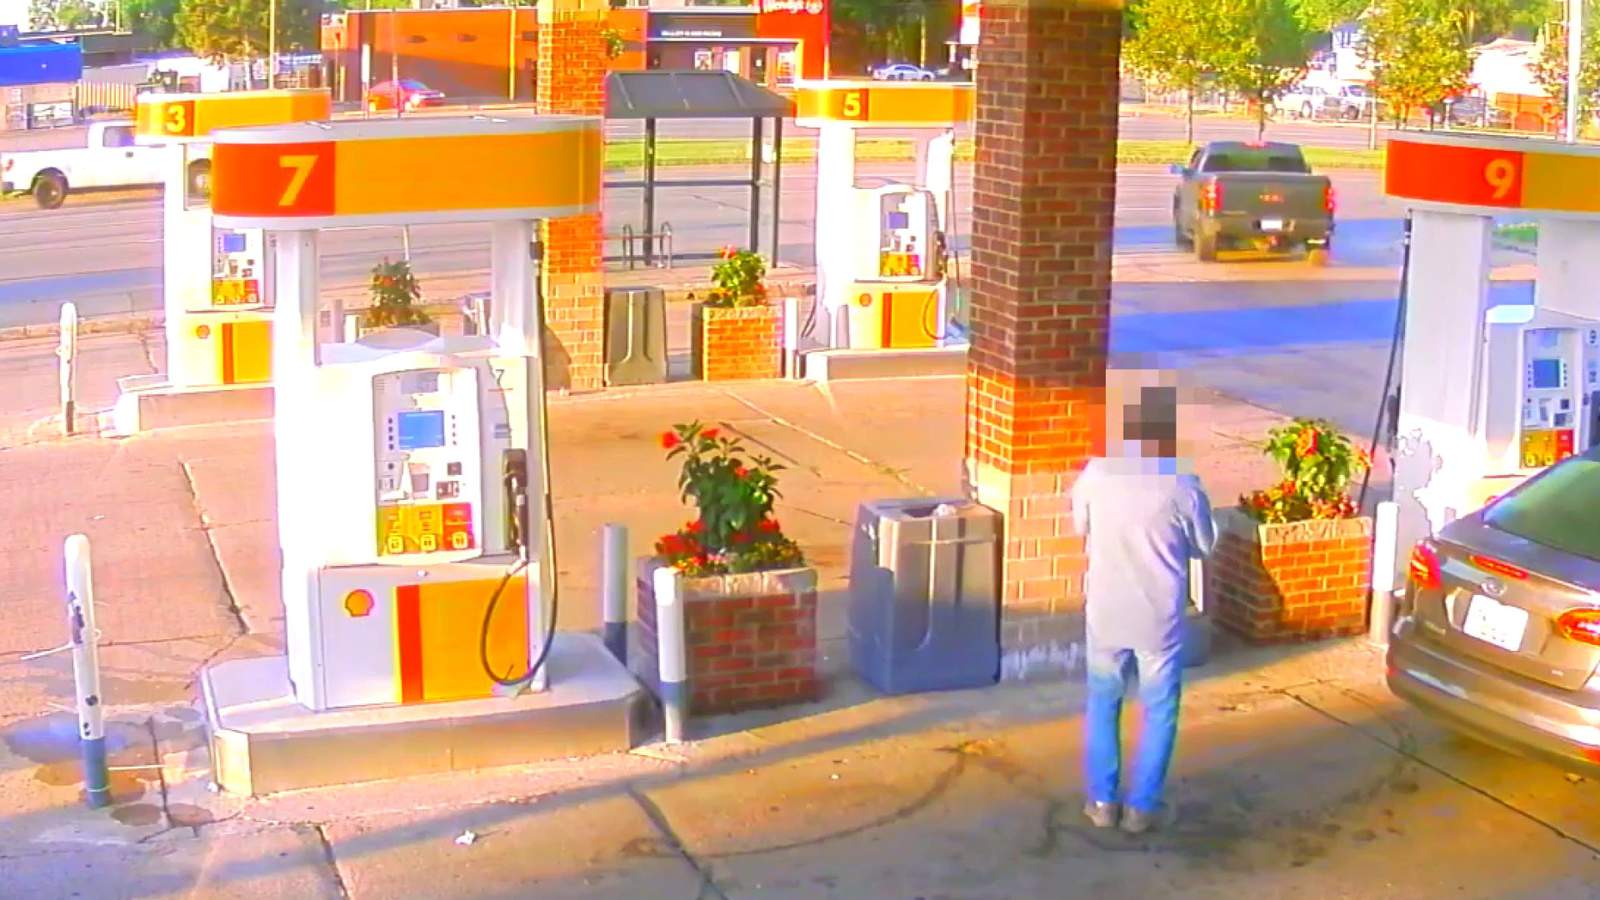 VIDEO: Man carjacked at Ferndale gas station